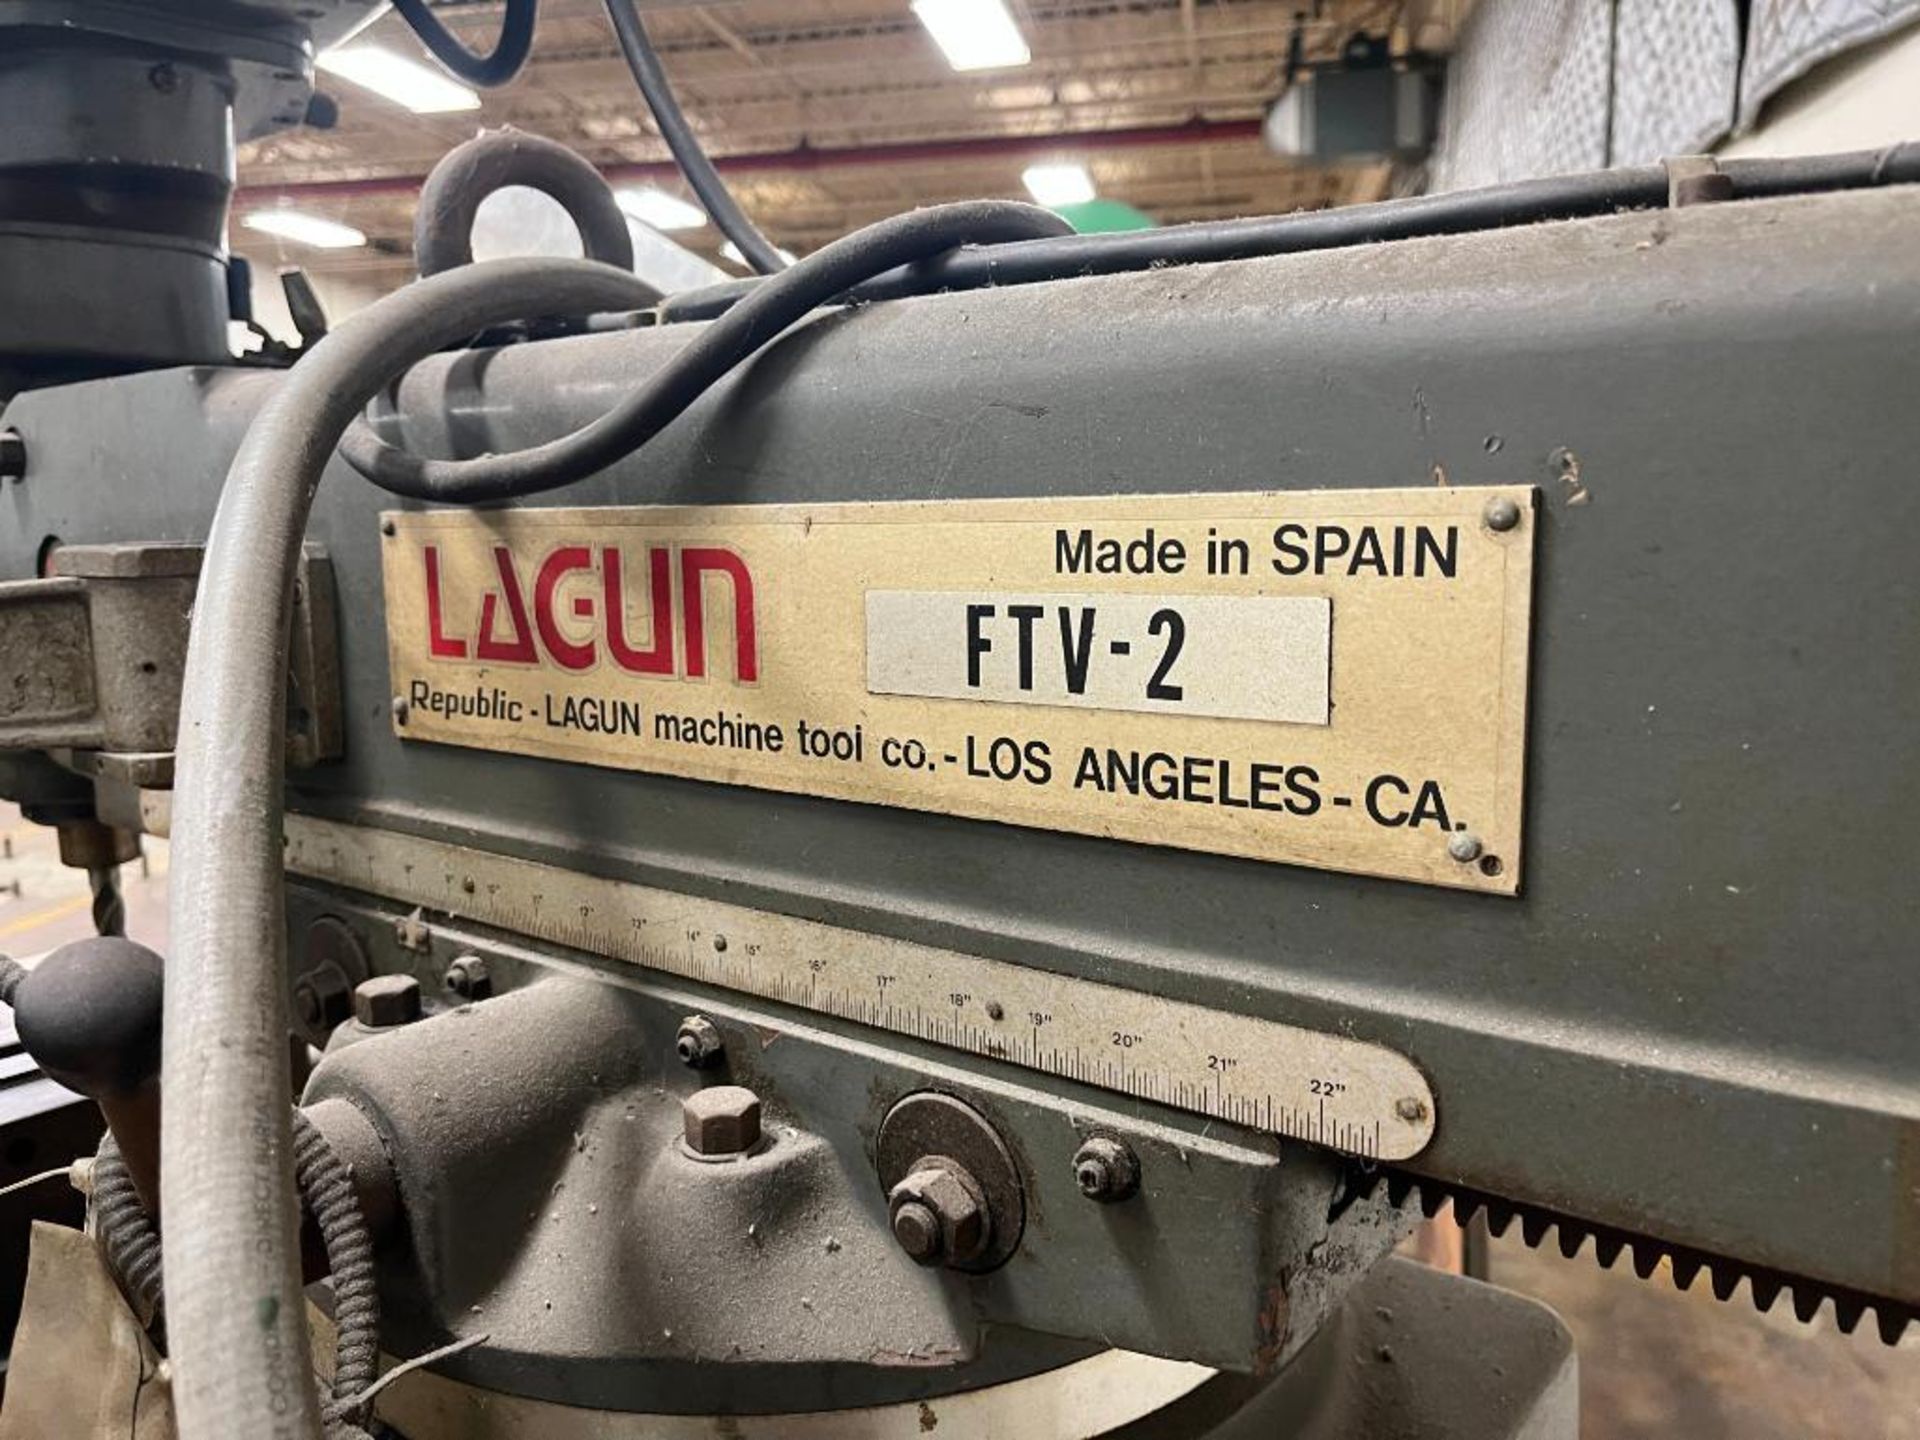 Lagun 2HP Model FTV-2 Vertical Mill 10" x 50" T-Slot Table, Power feed Fagor 2 Axis DRO - Image 7 of 8